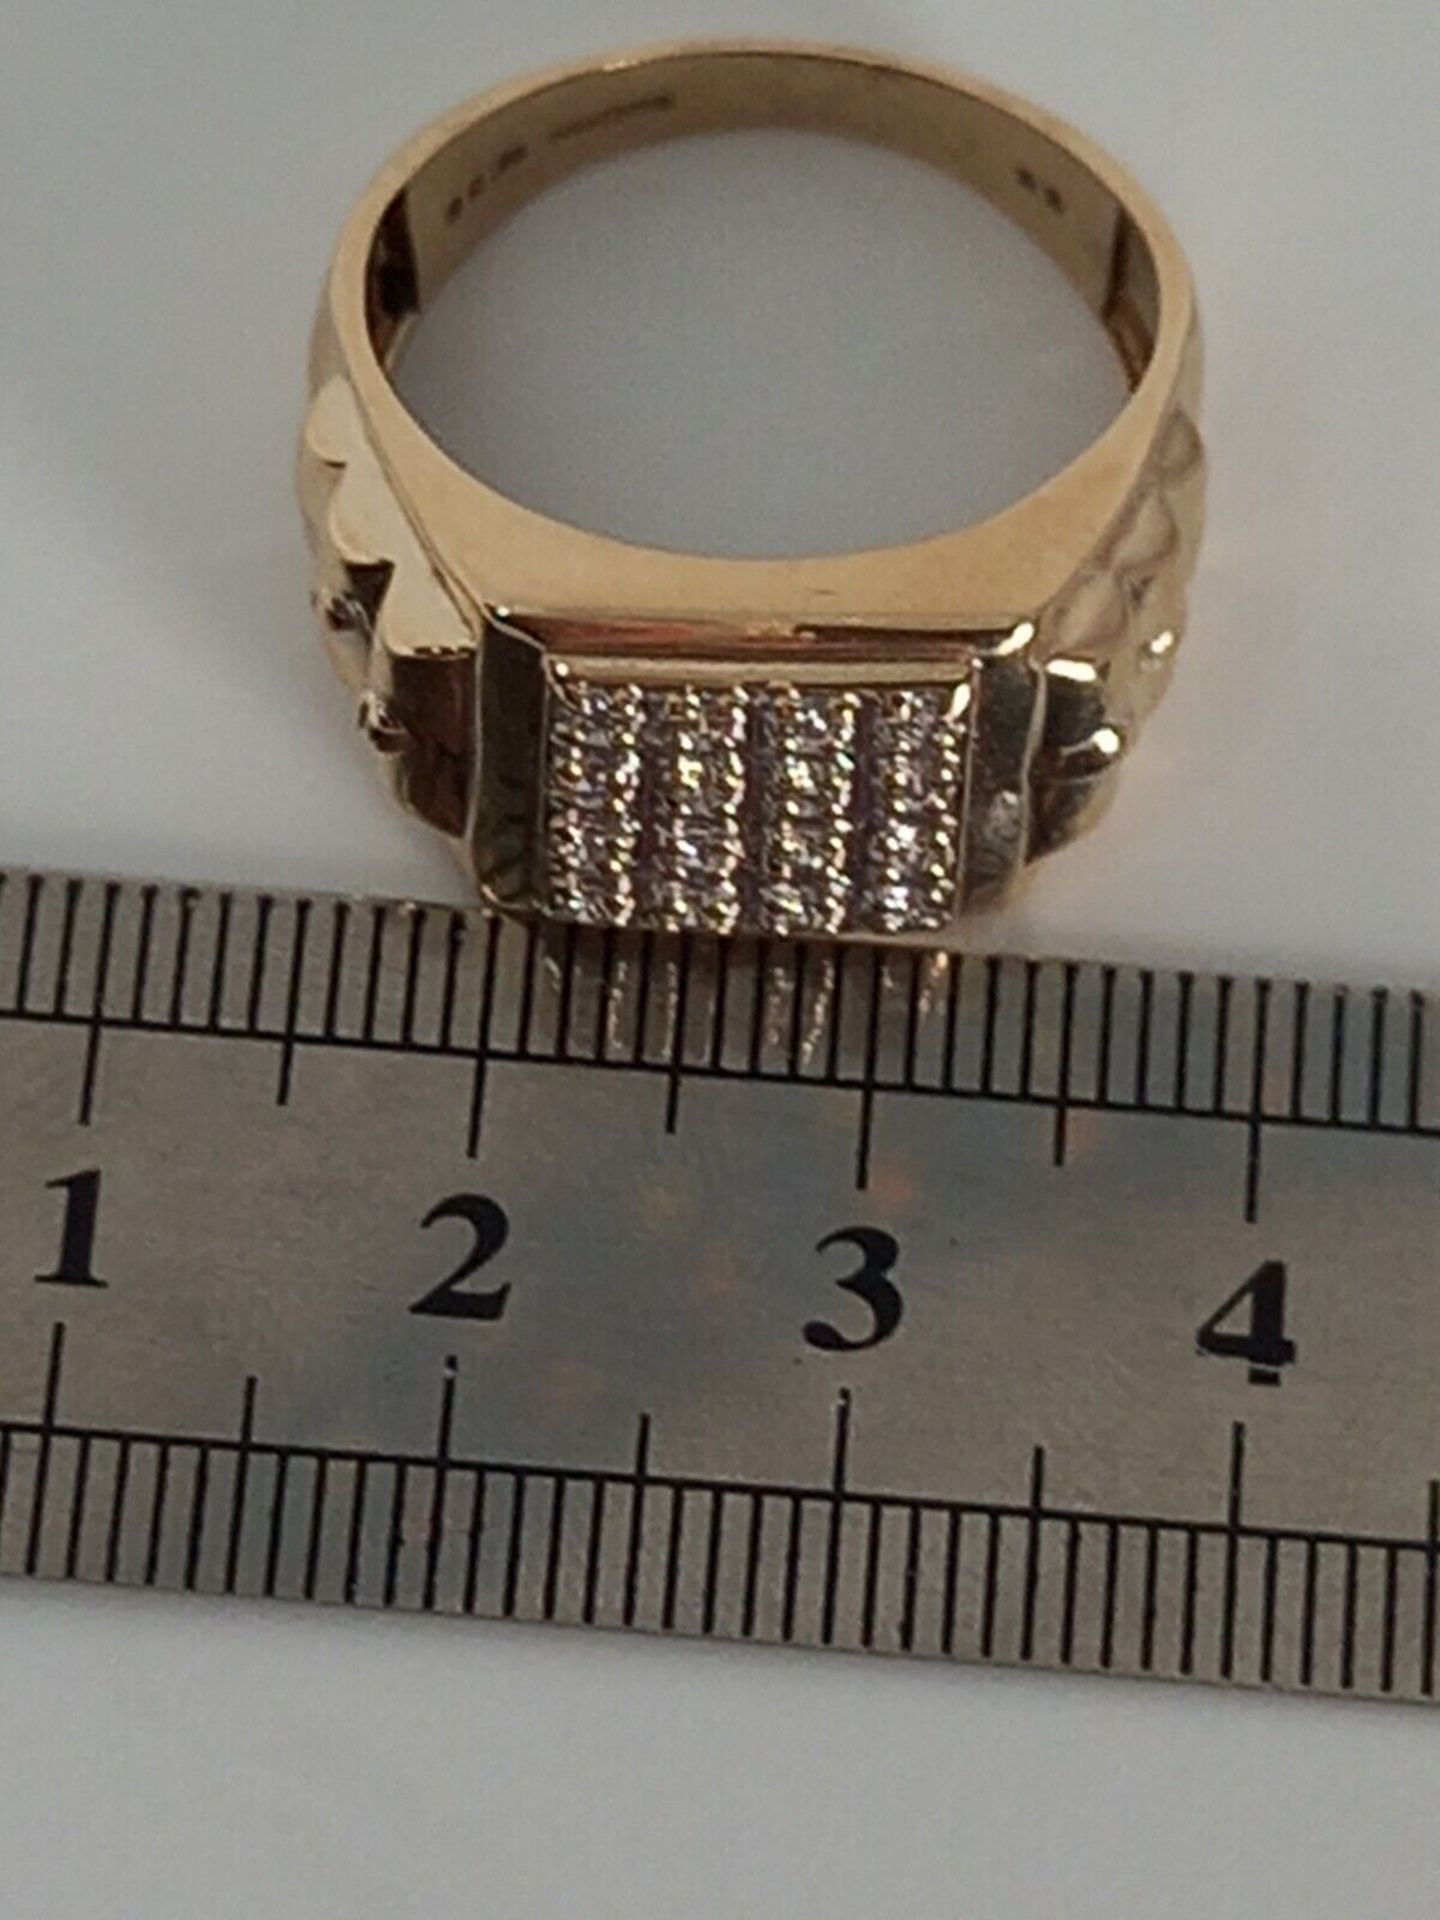 SIGNET RING FEATURES 16 DIAMONDS IN A LUX PAVE SETTING, ENCLAVED IN 9CT YELLOW GOLD - Image 4 of 5